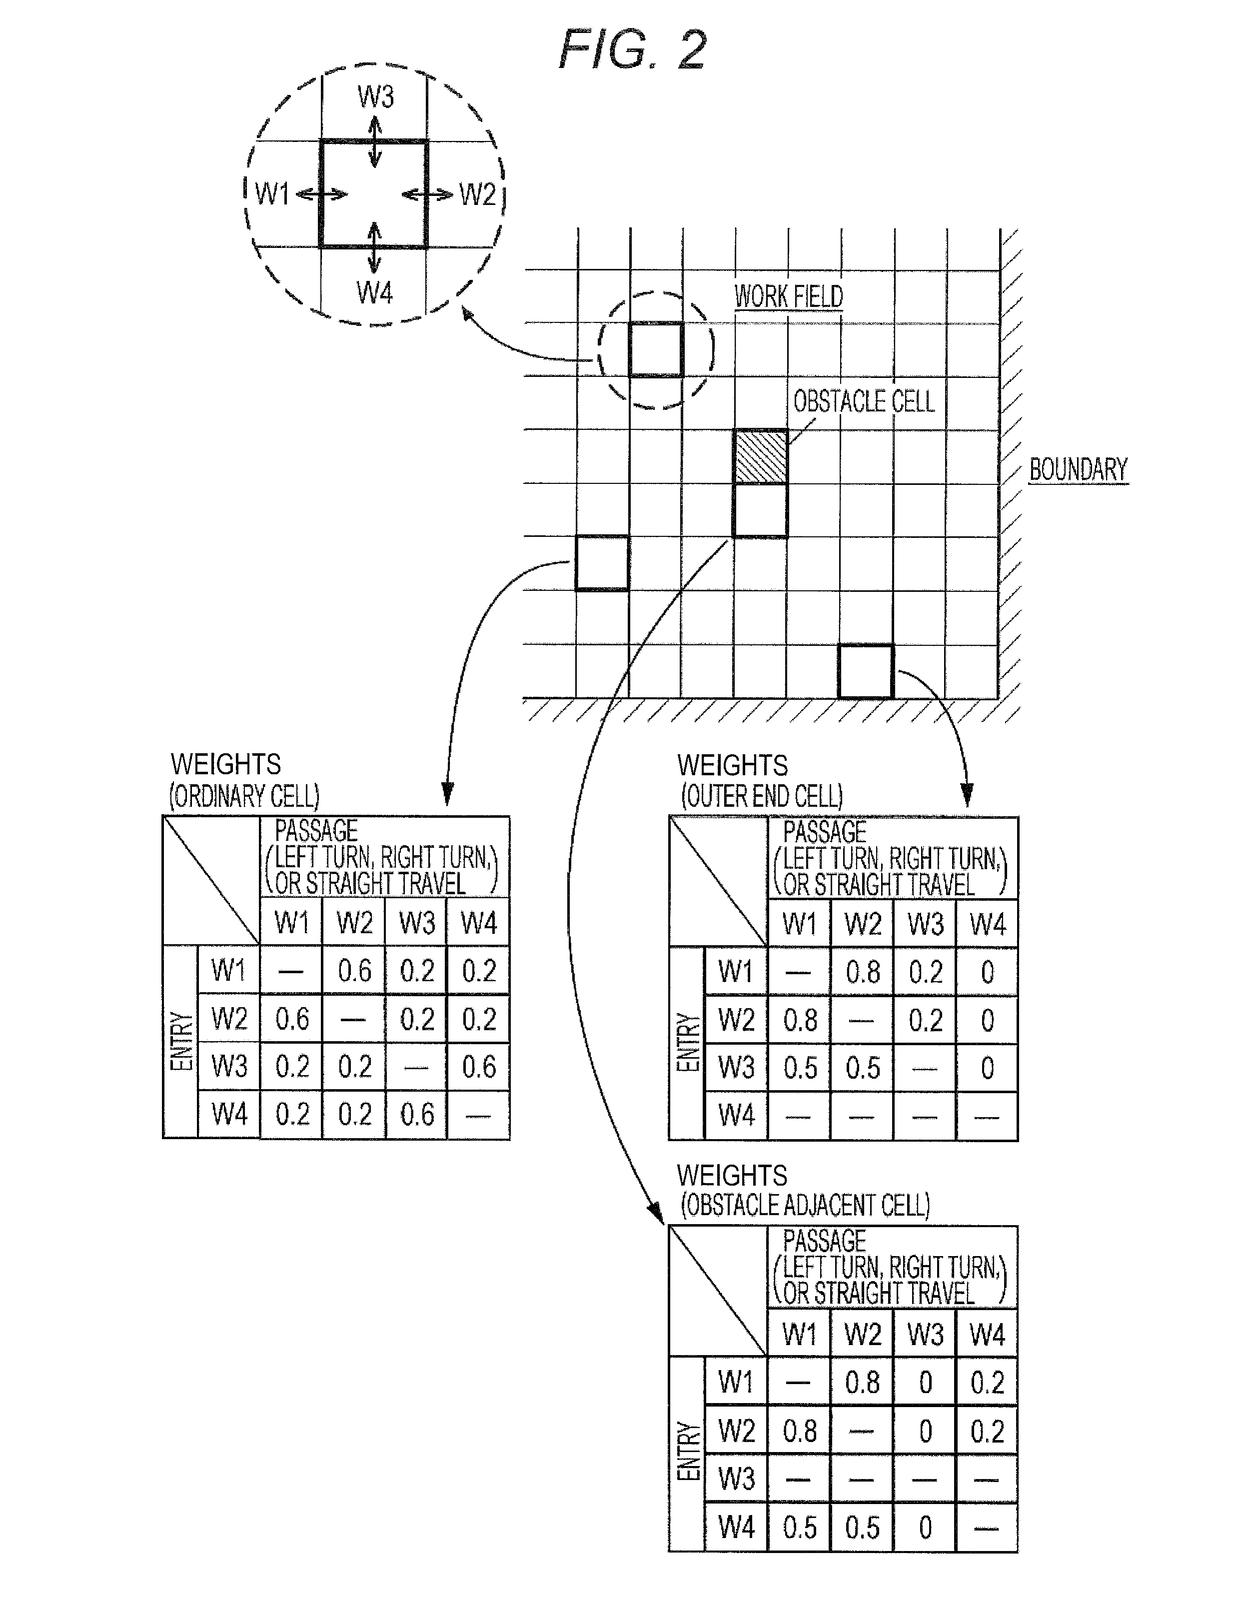 Travel route generating device and method for generating travel route